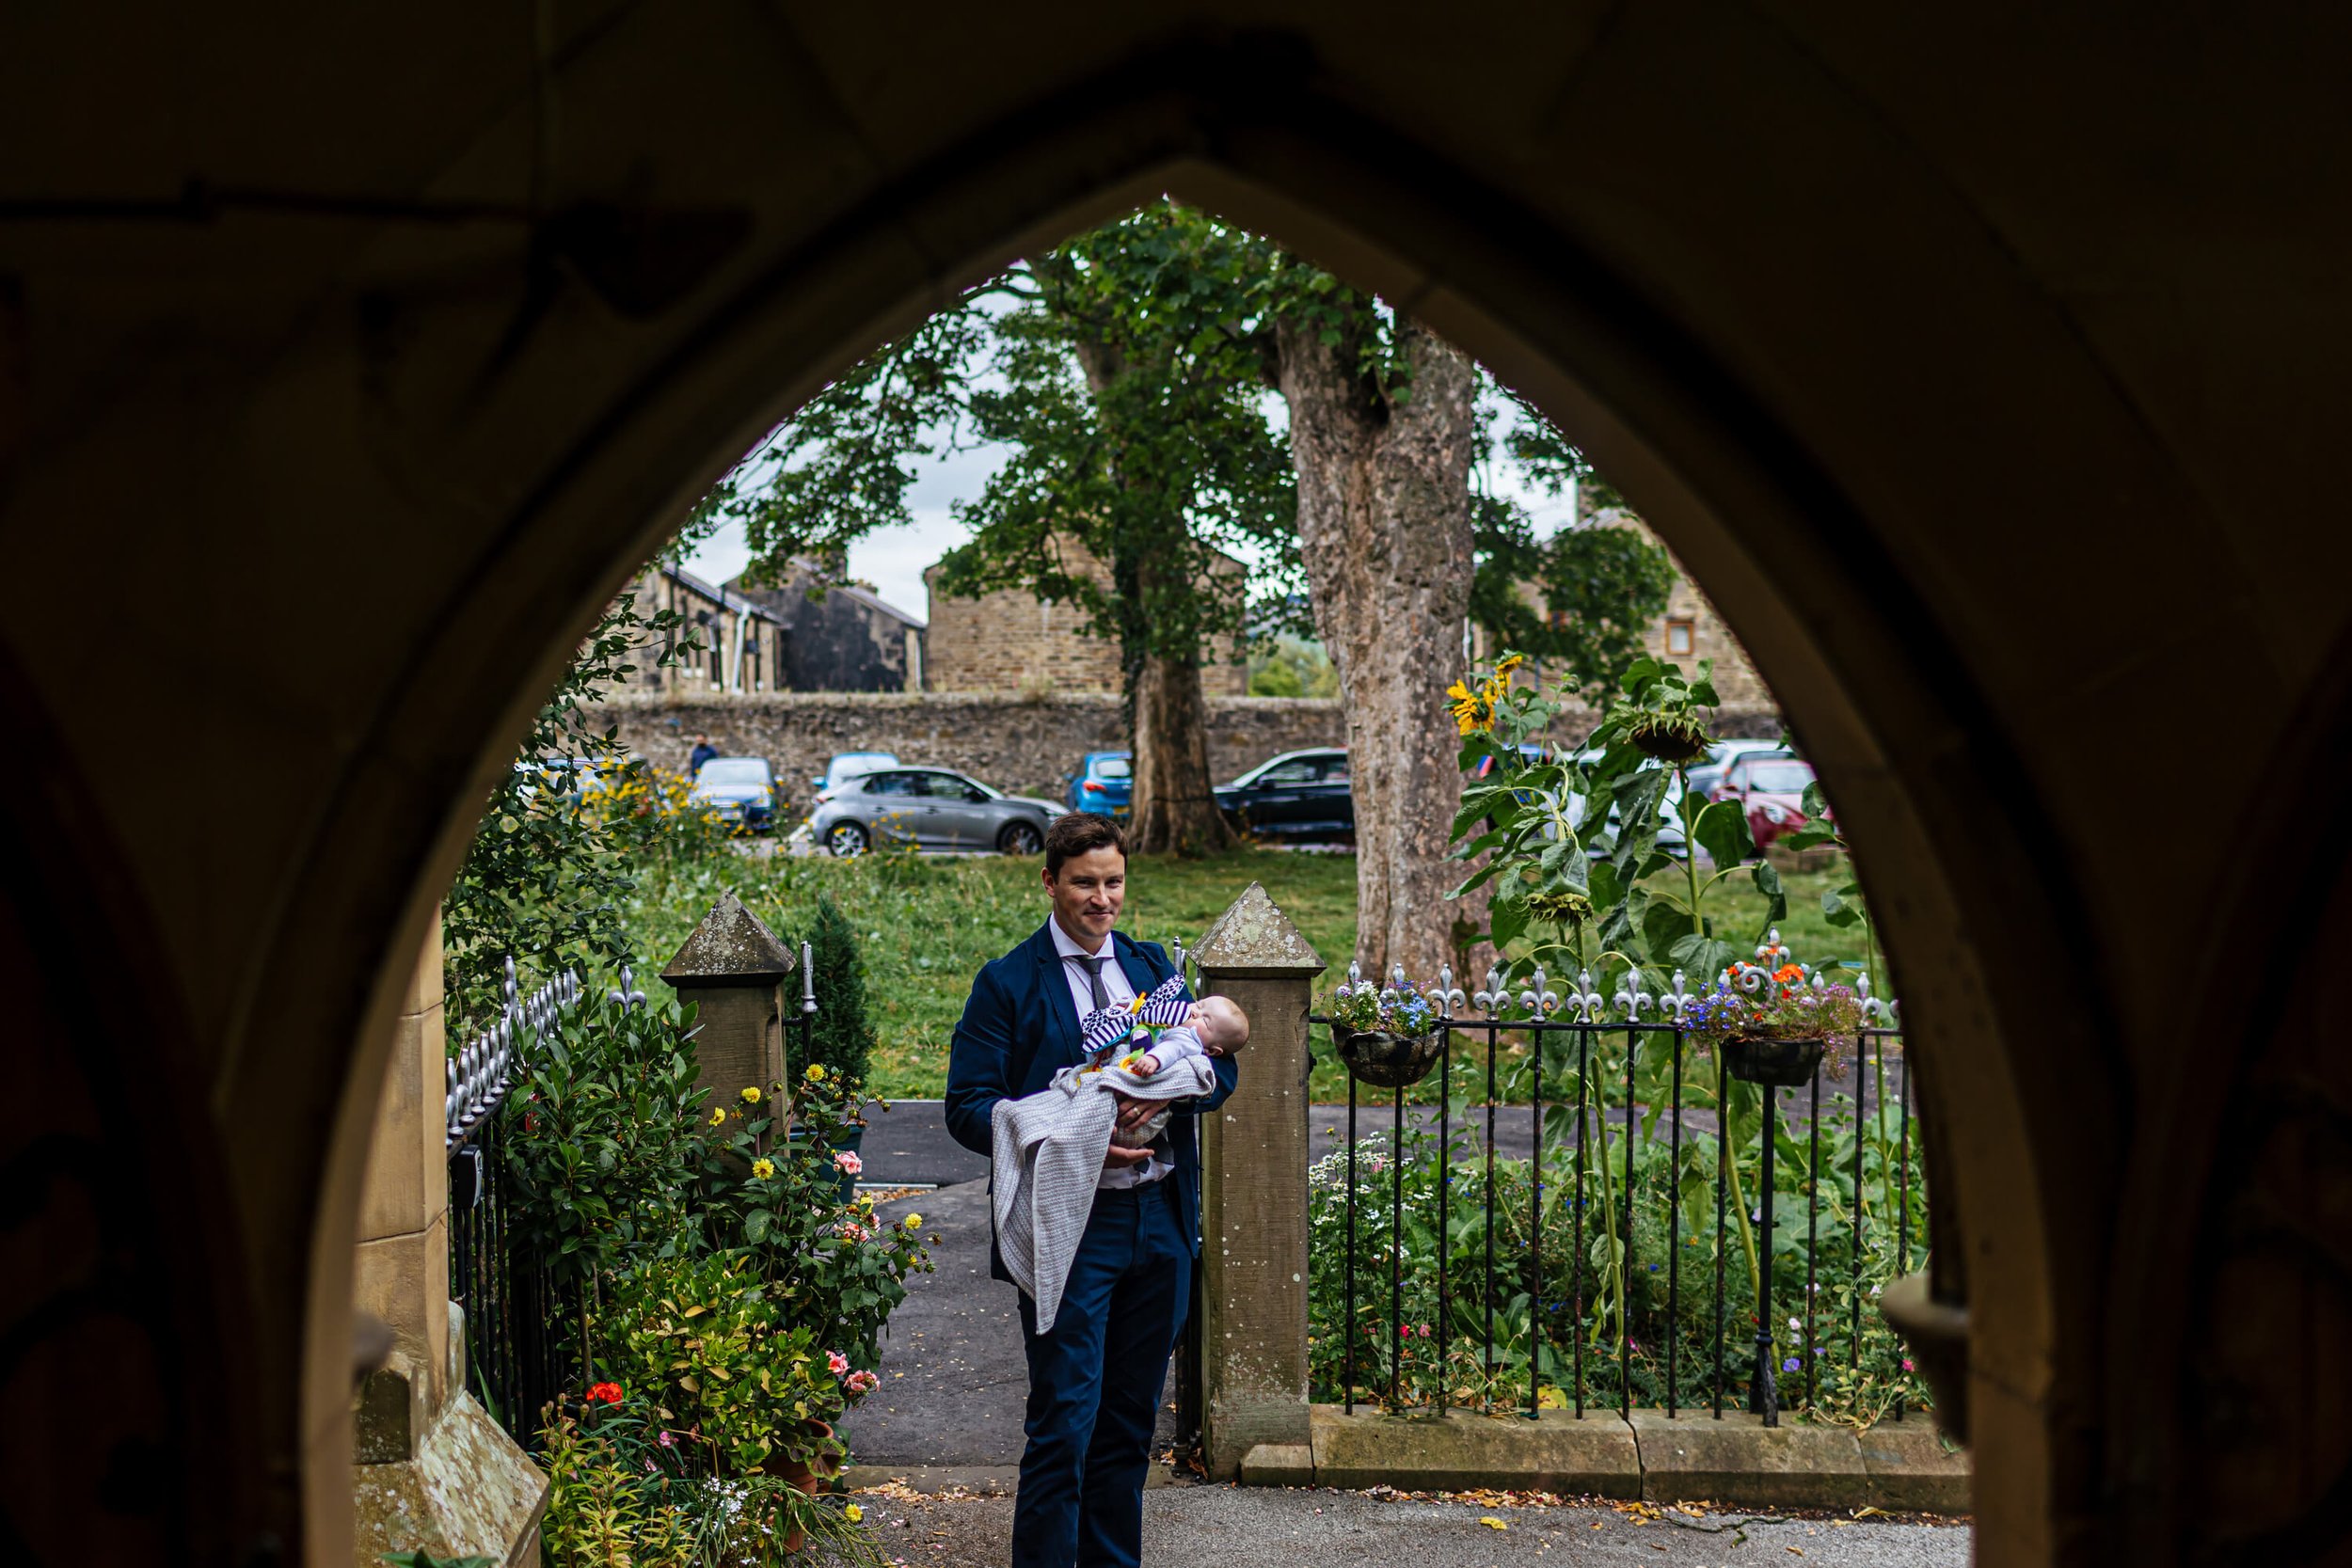 A wedding guests holding a baby outside the church door